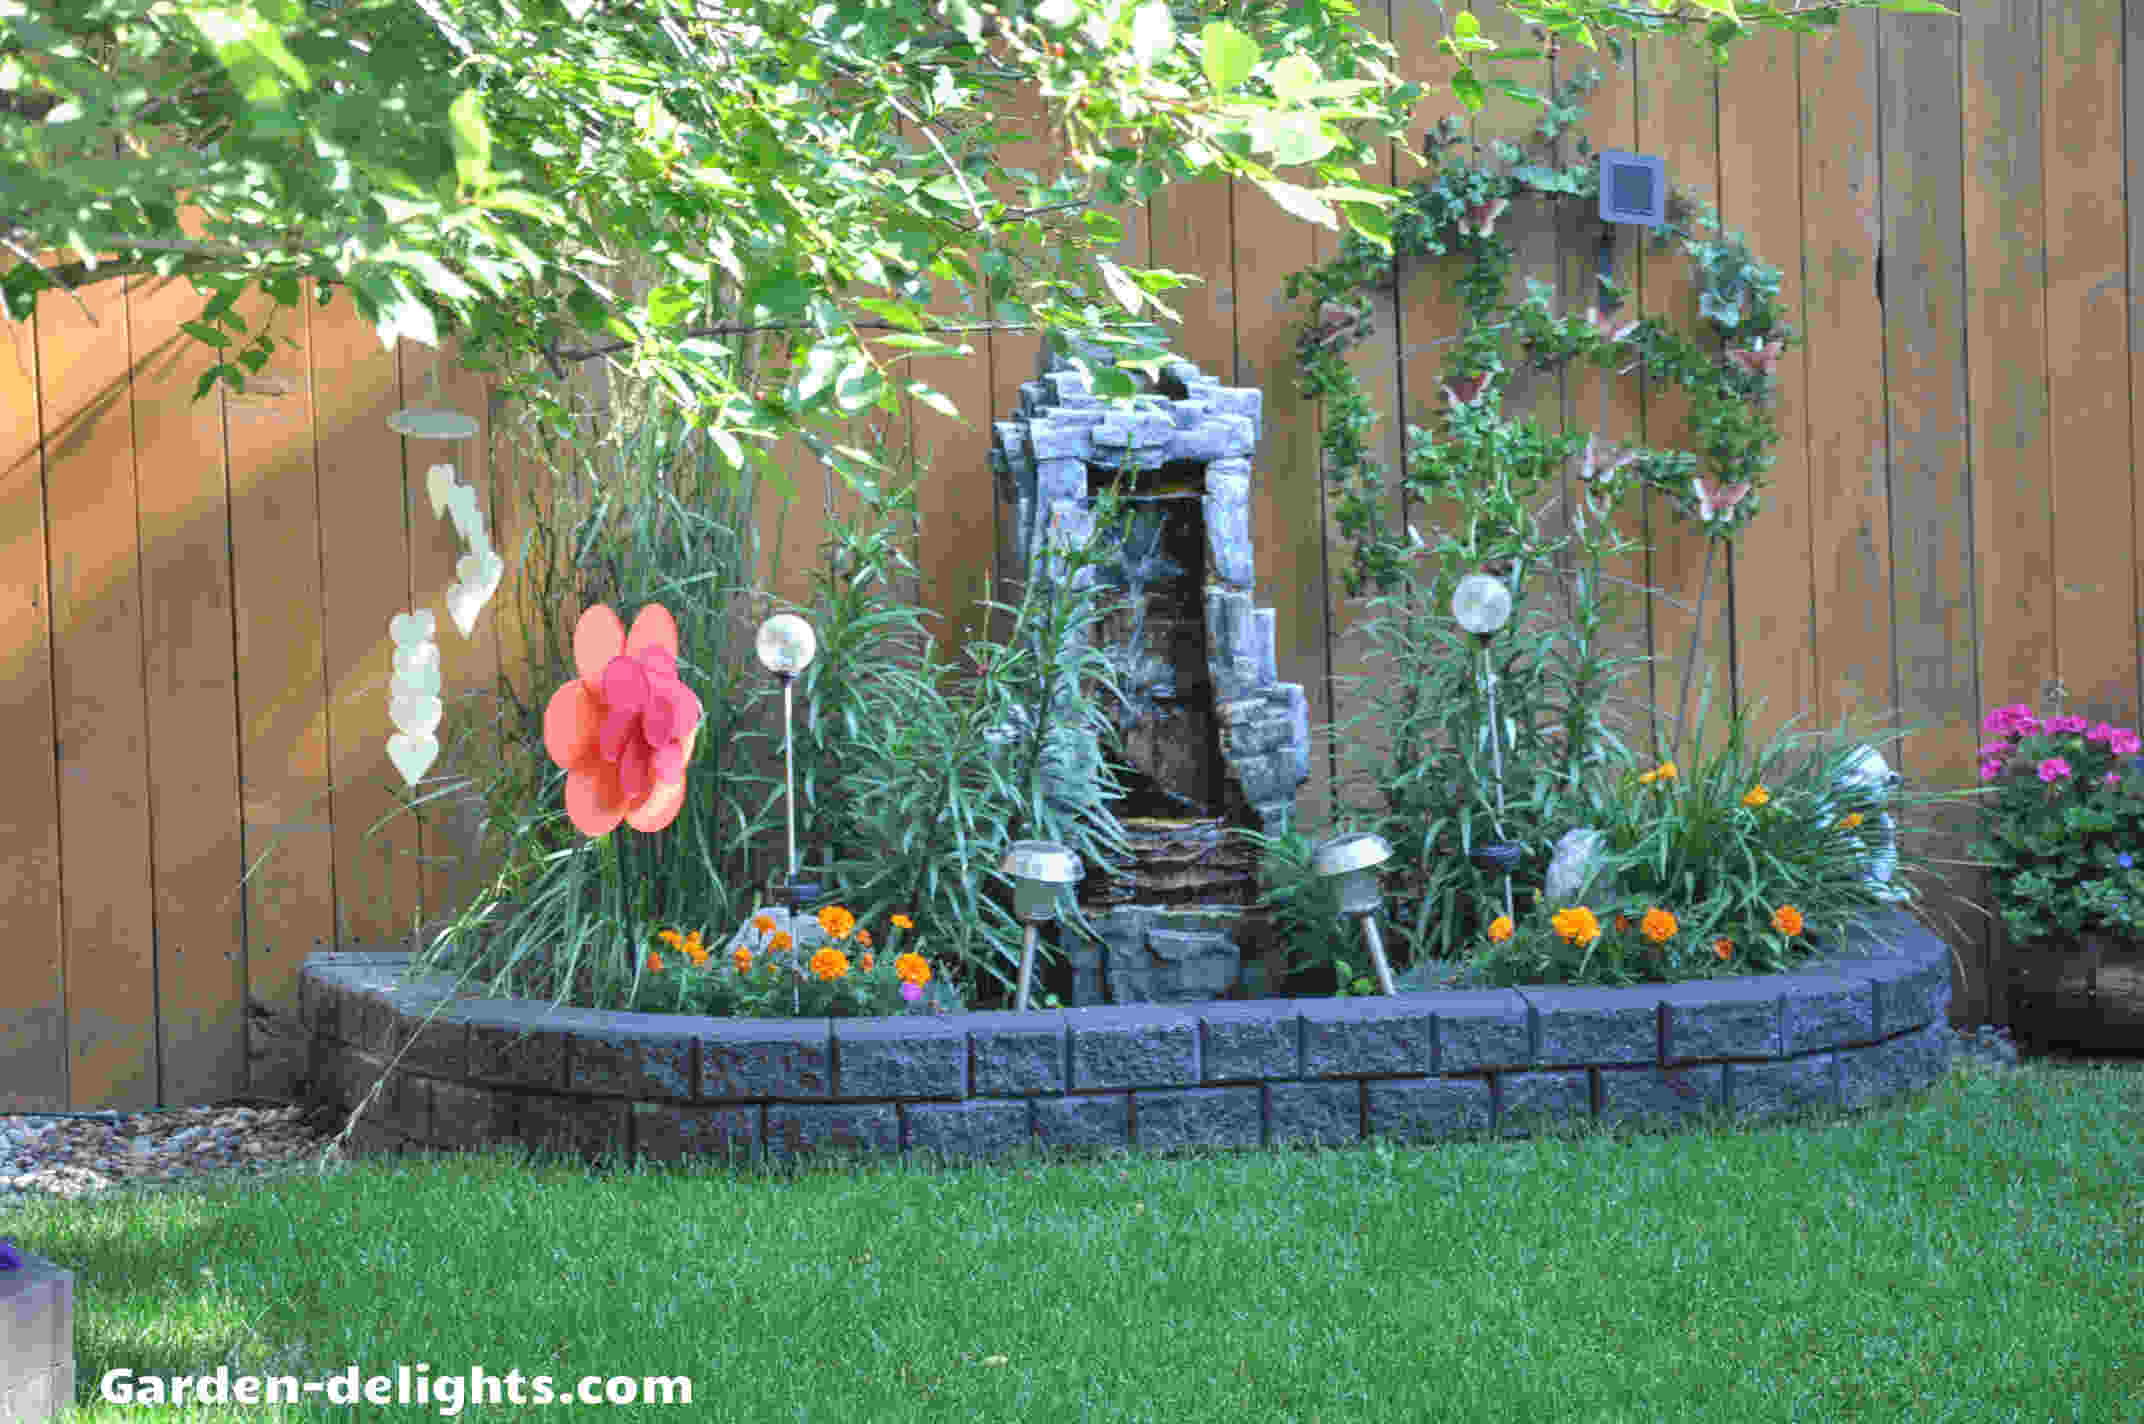  Stonewall water feature in flower bed surrounded by red tulips against Cedar fence, water fountain, Home Depot, large outdoor fountains, landscaping ideas, backyard planning, patios,Gardening insights, modern fountain, sleek fountain, water fountain ideas, garden water feature, small water features.